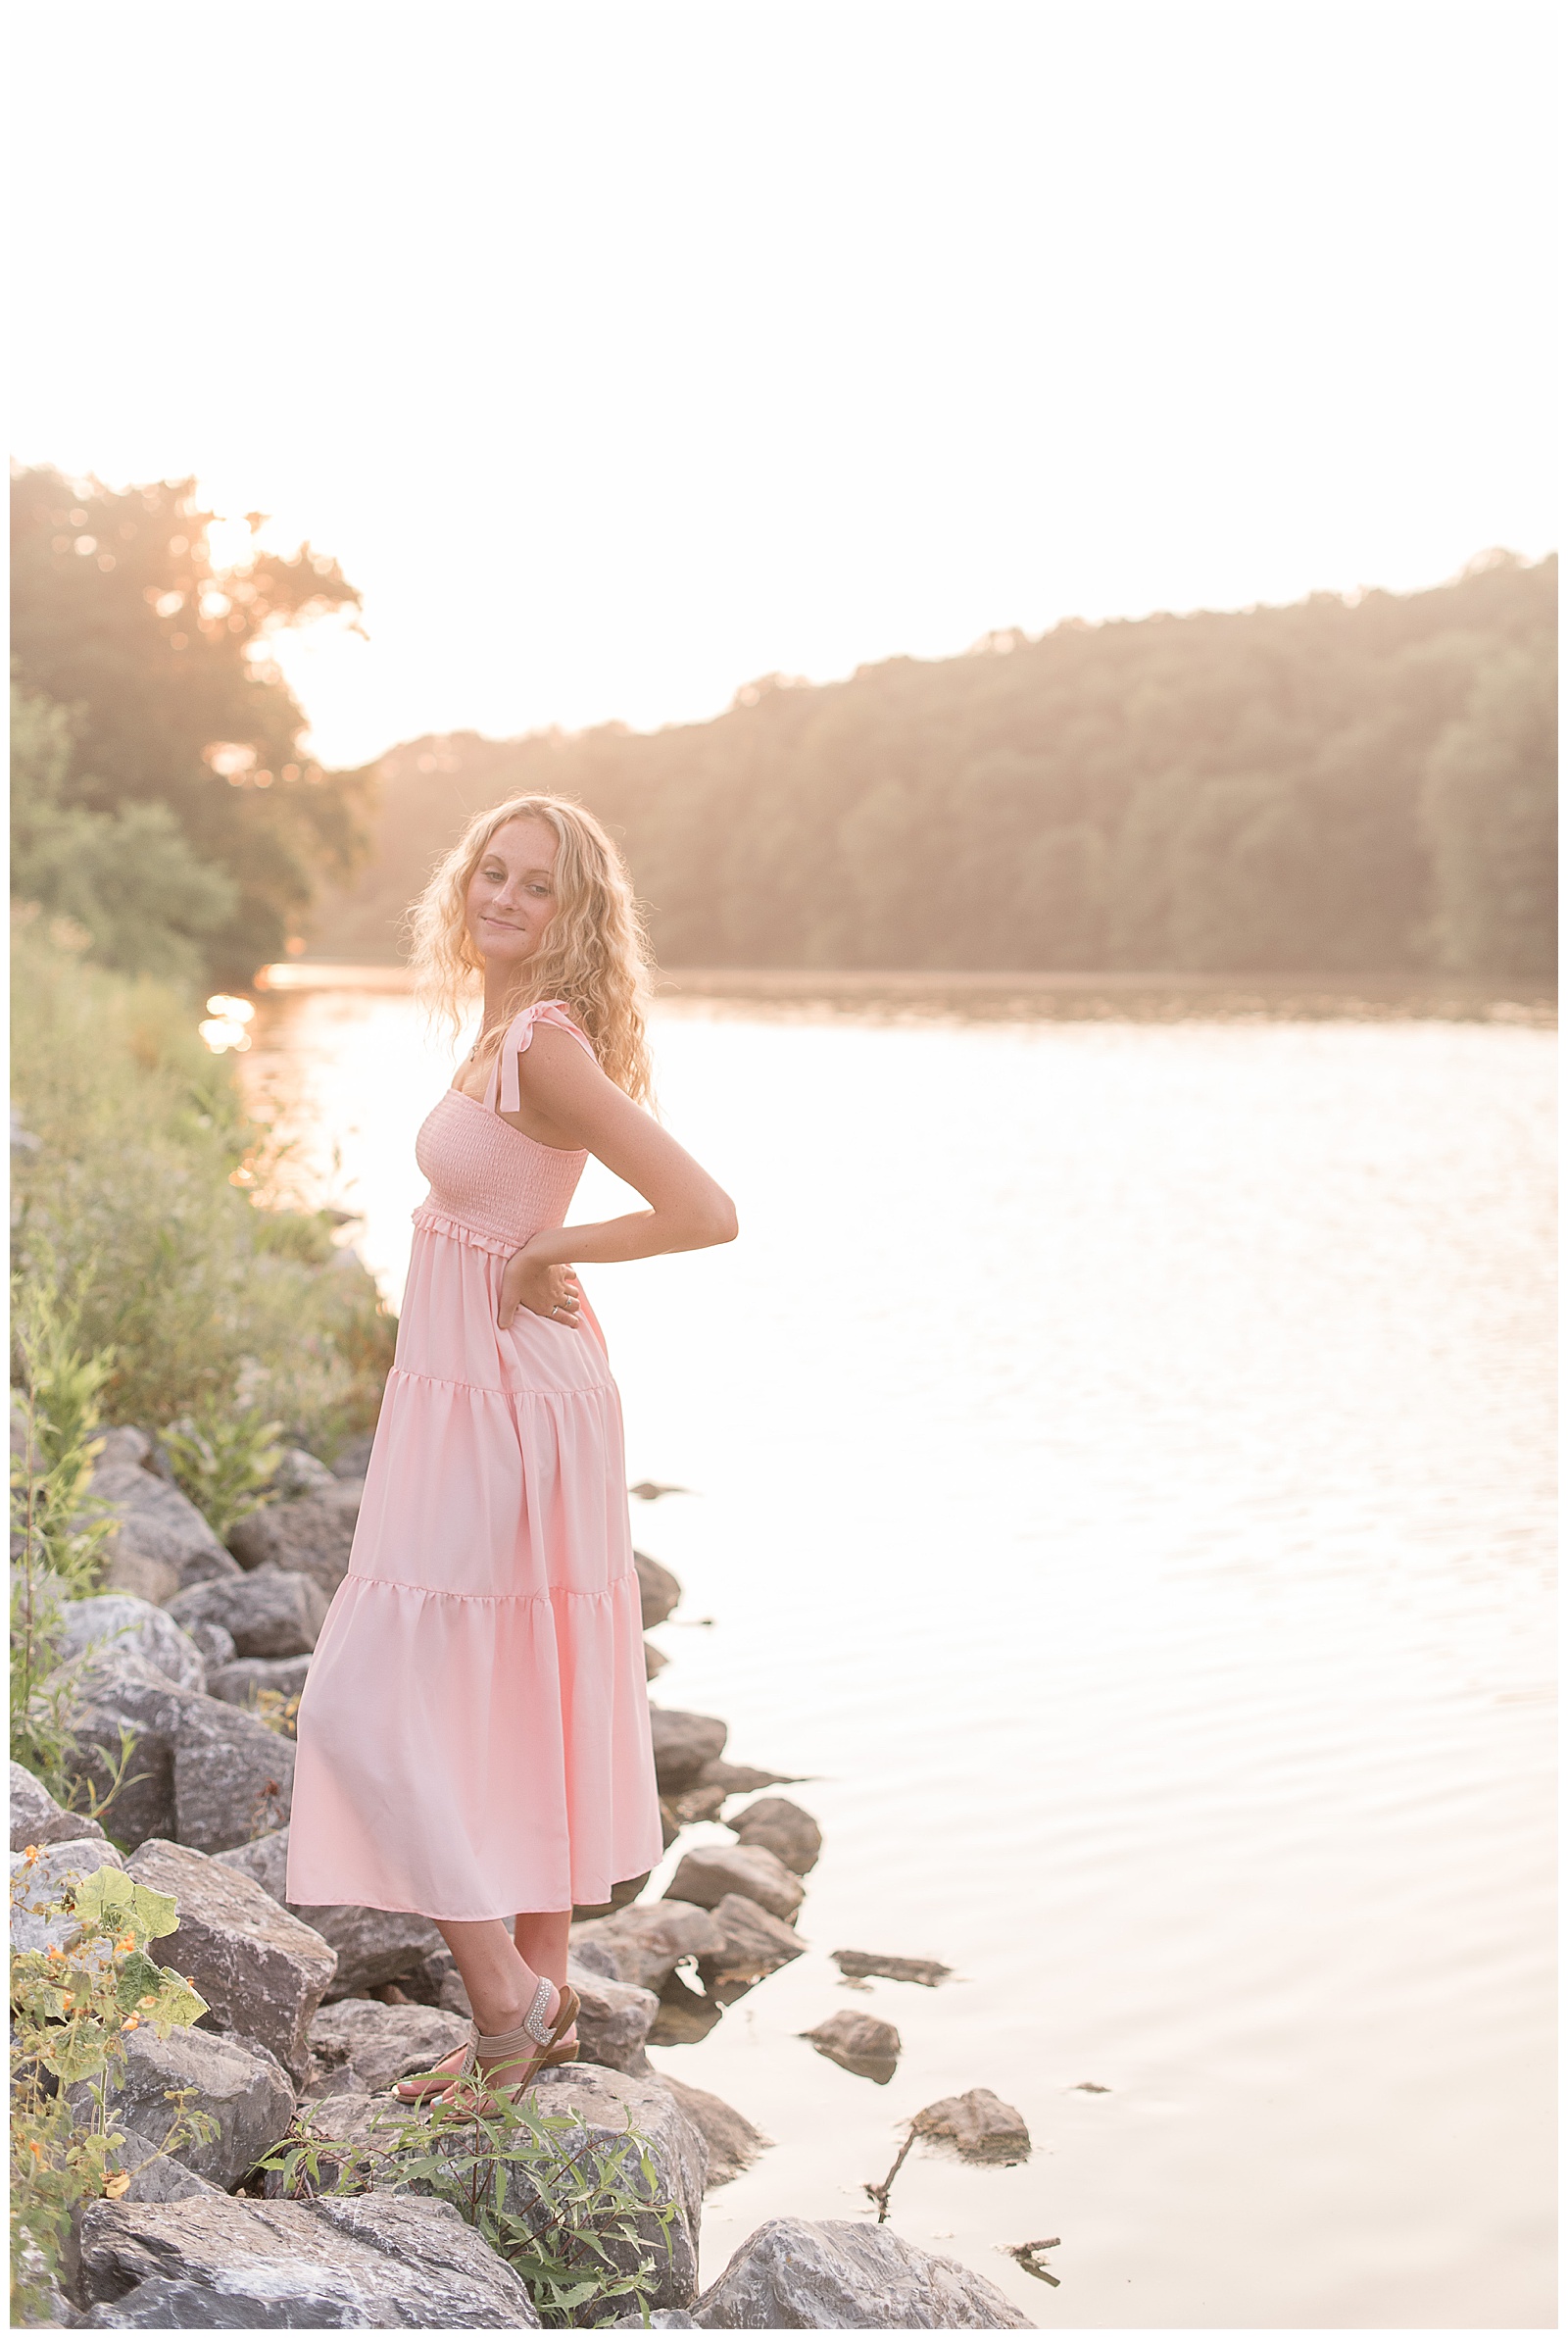 senior girl on large rocks by speedwell forge lake as the bright sun sets behind her in lititz pennsylvania